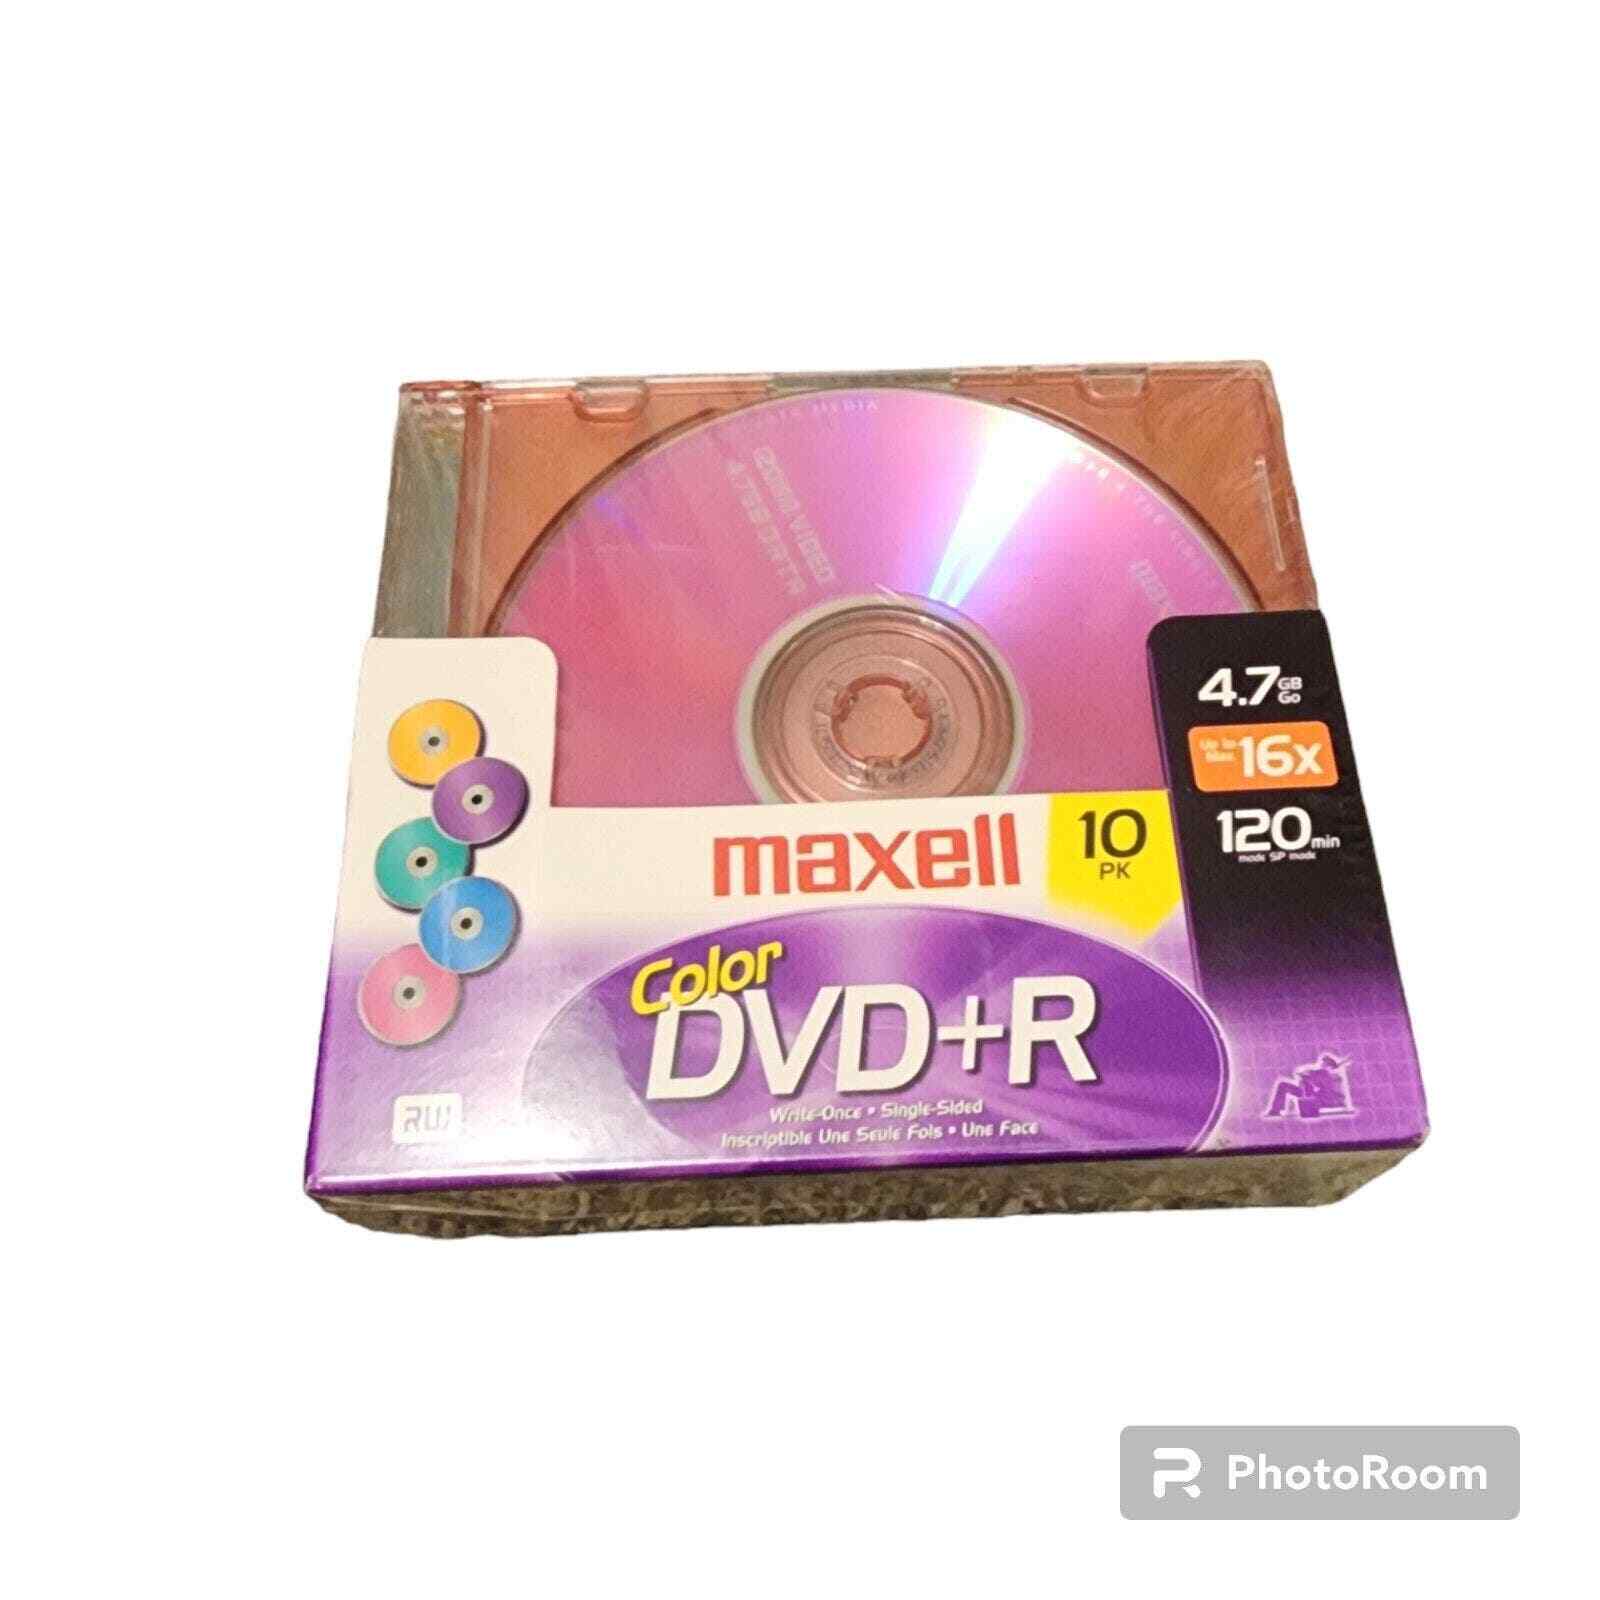 MAXELL COLOR DVD-R 10 PACK 4.7GB 120 MIN BRAND NEW FACTORY SEALED